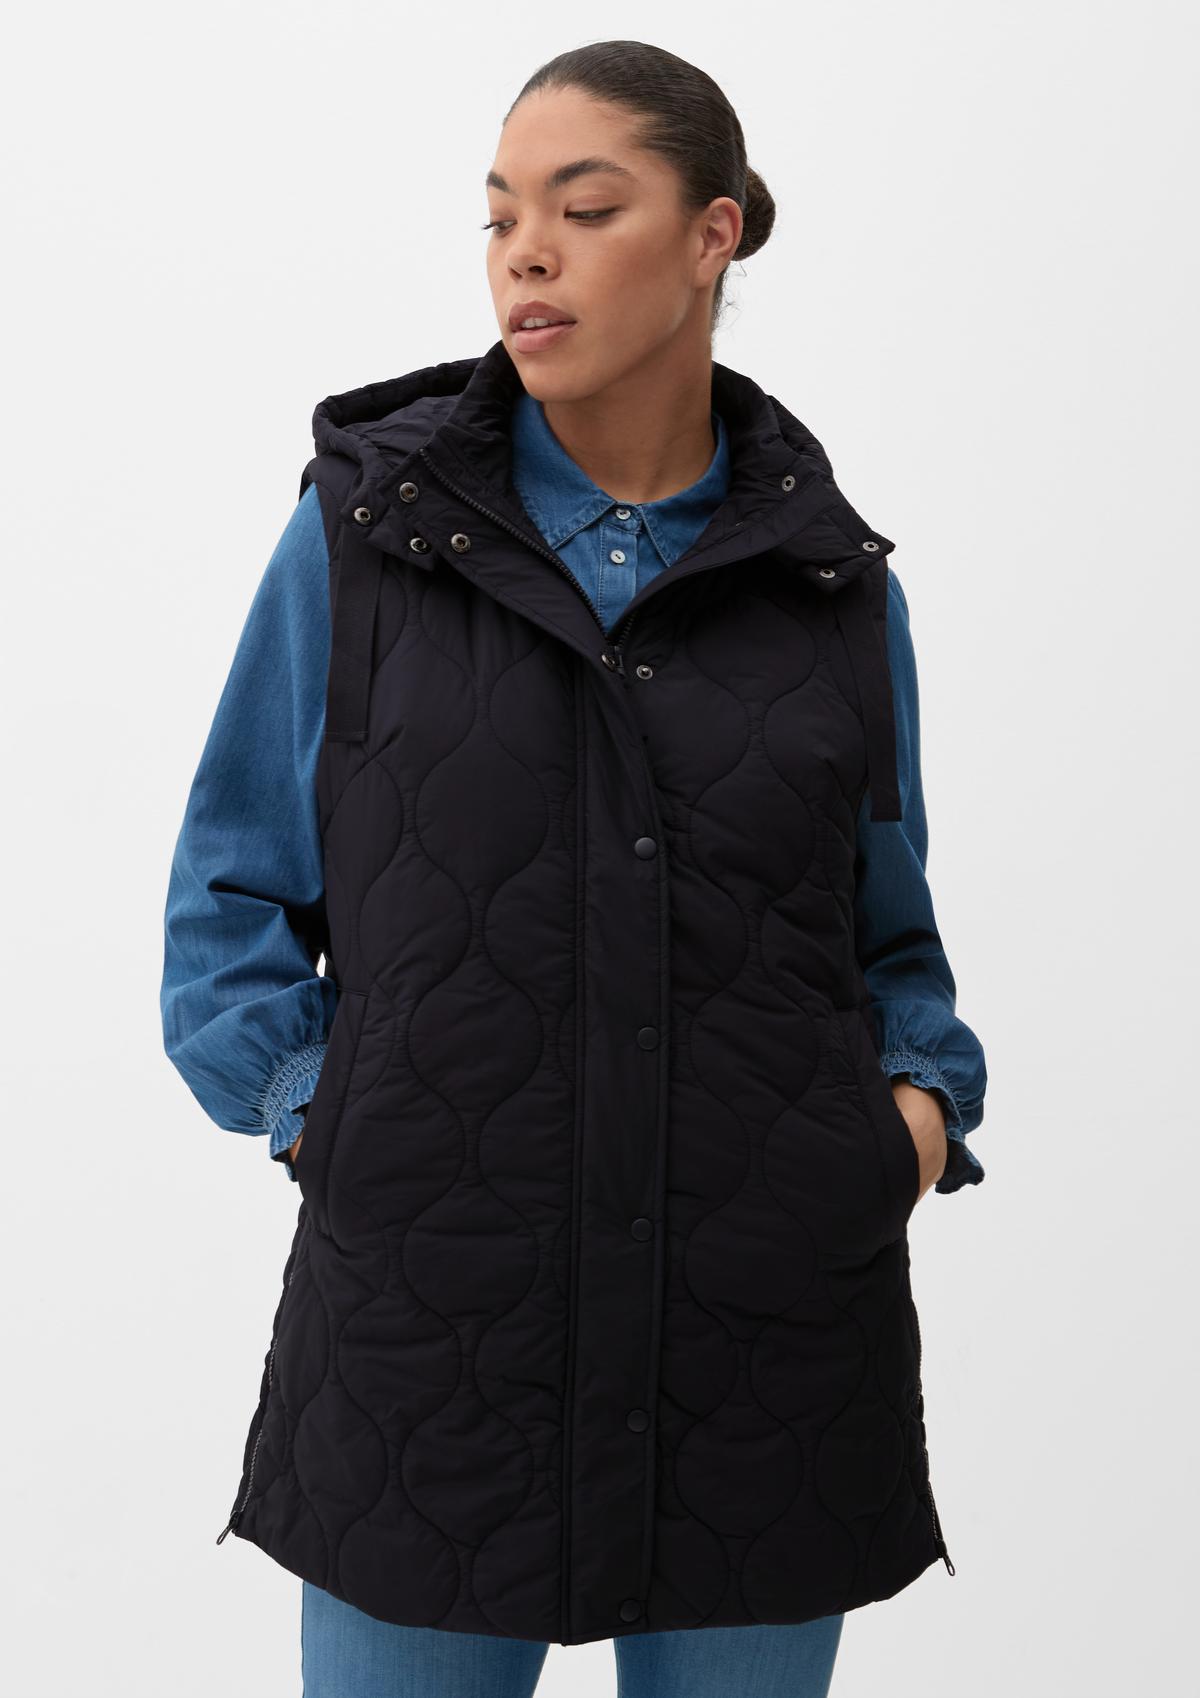 Quilted body warmer with a hood